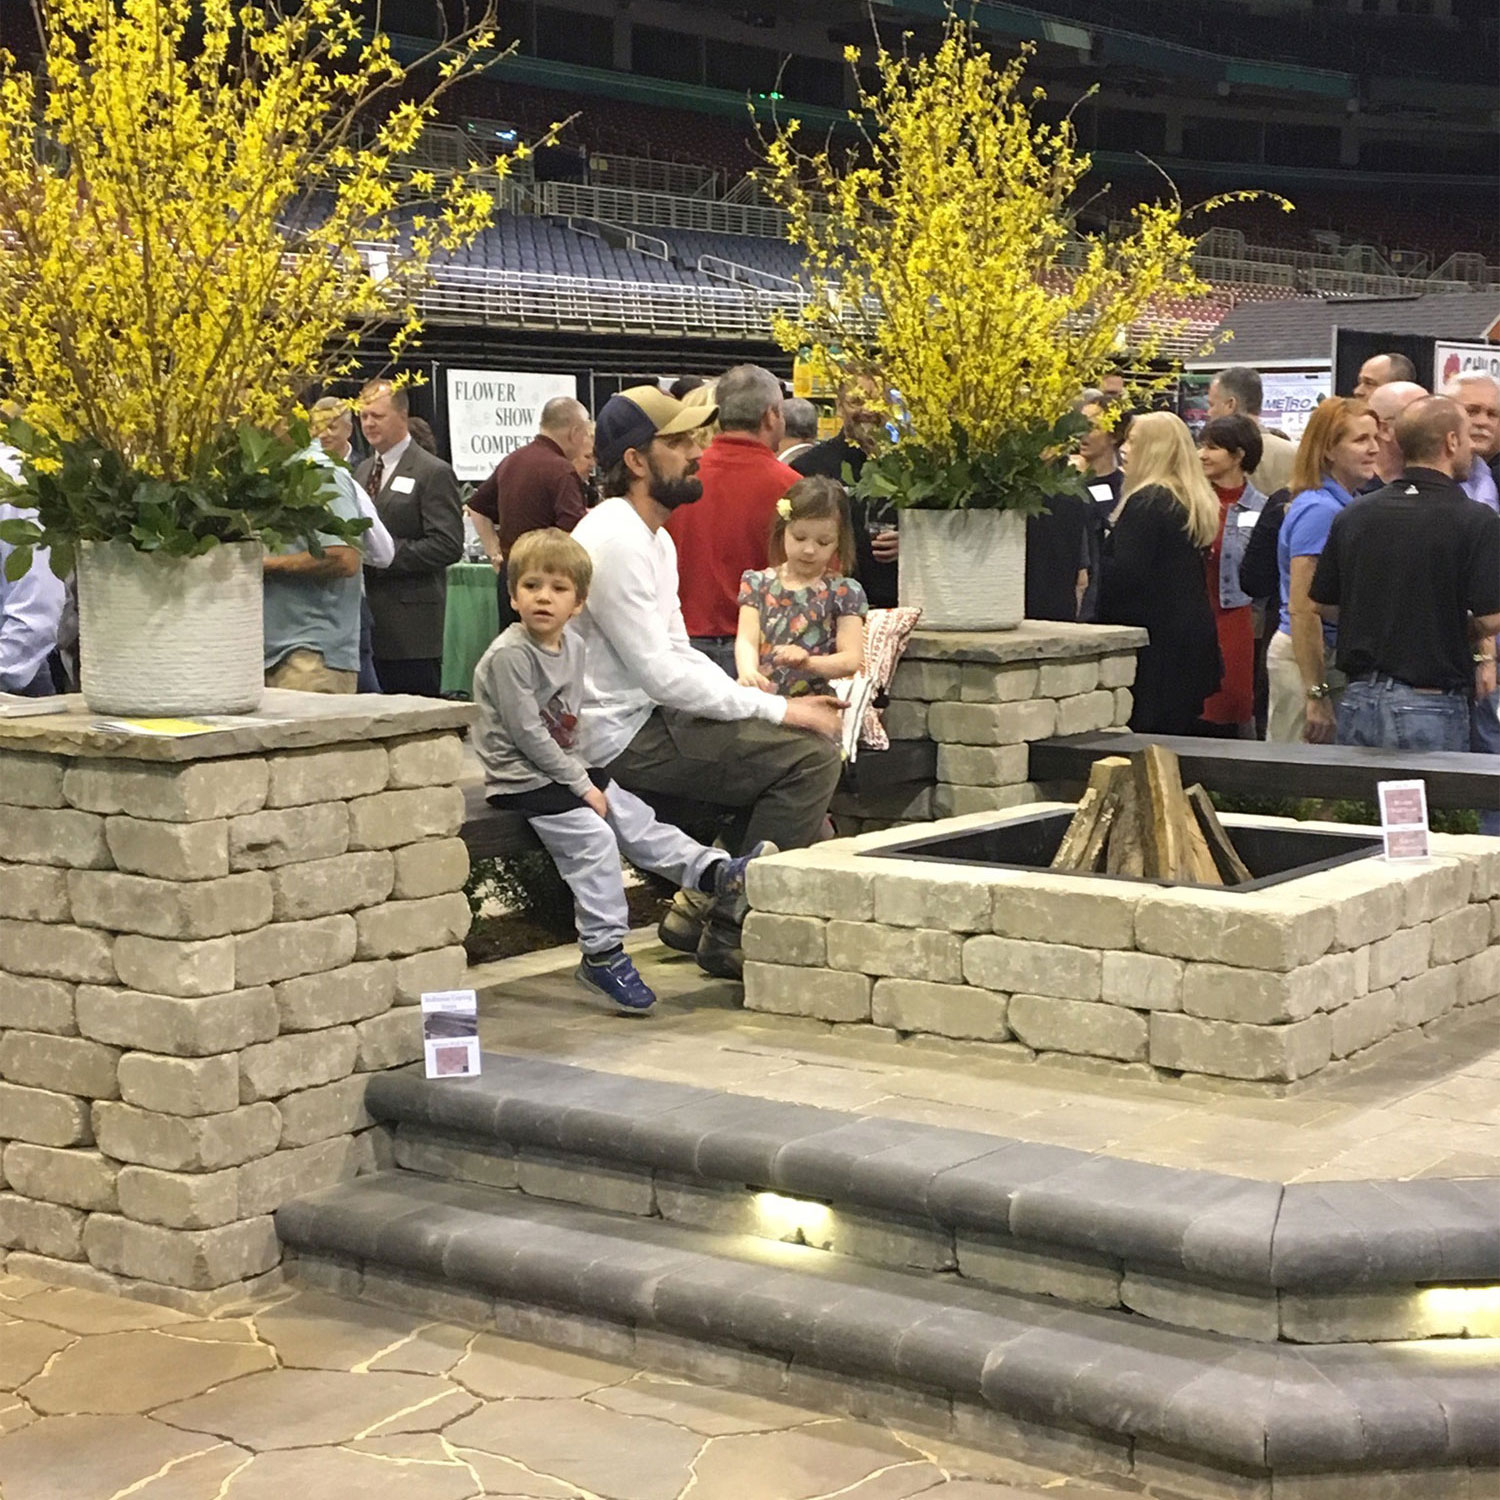 Outdoor Creative Design at the St. Louis Home Show